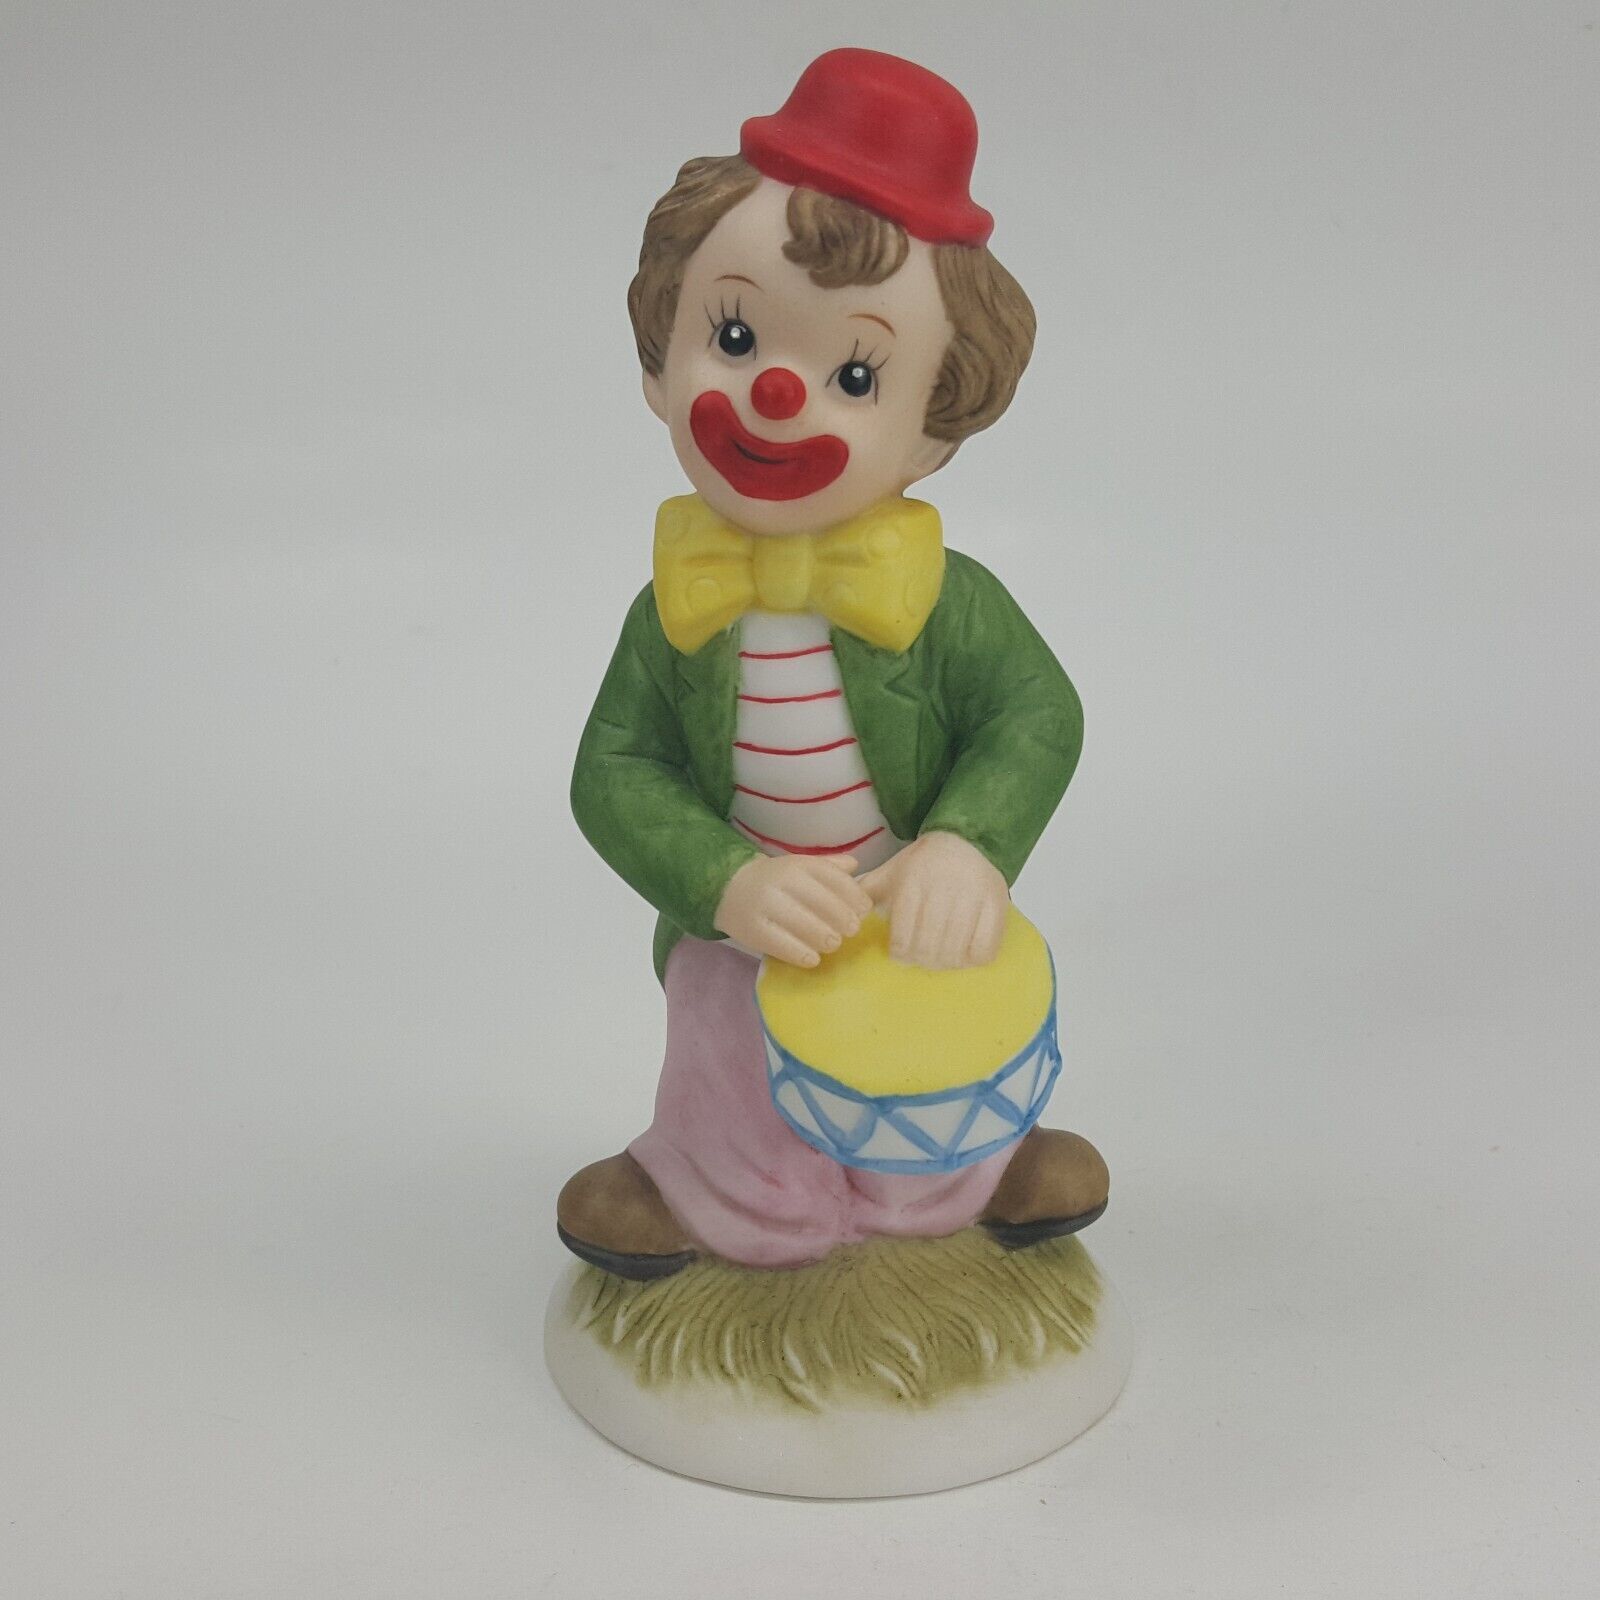 Vintage Lefton China Clown hand painted 1990 # 07553 drummer boy WKHJY - $5.00